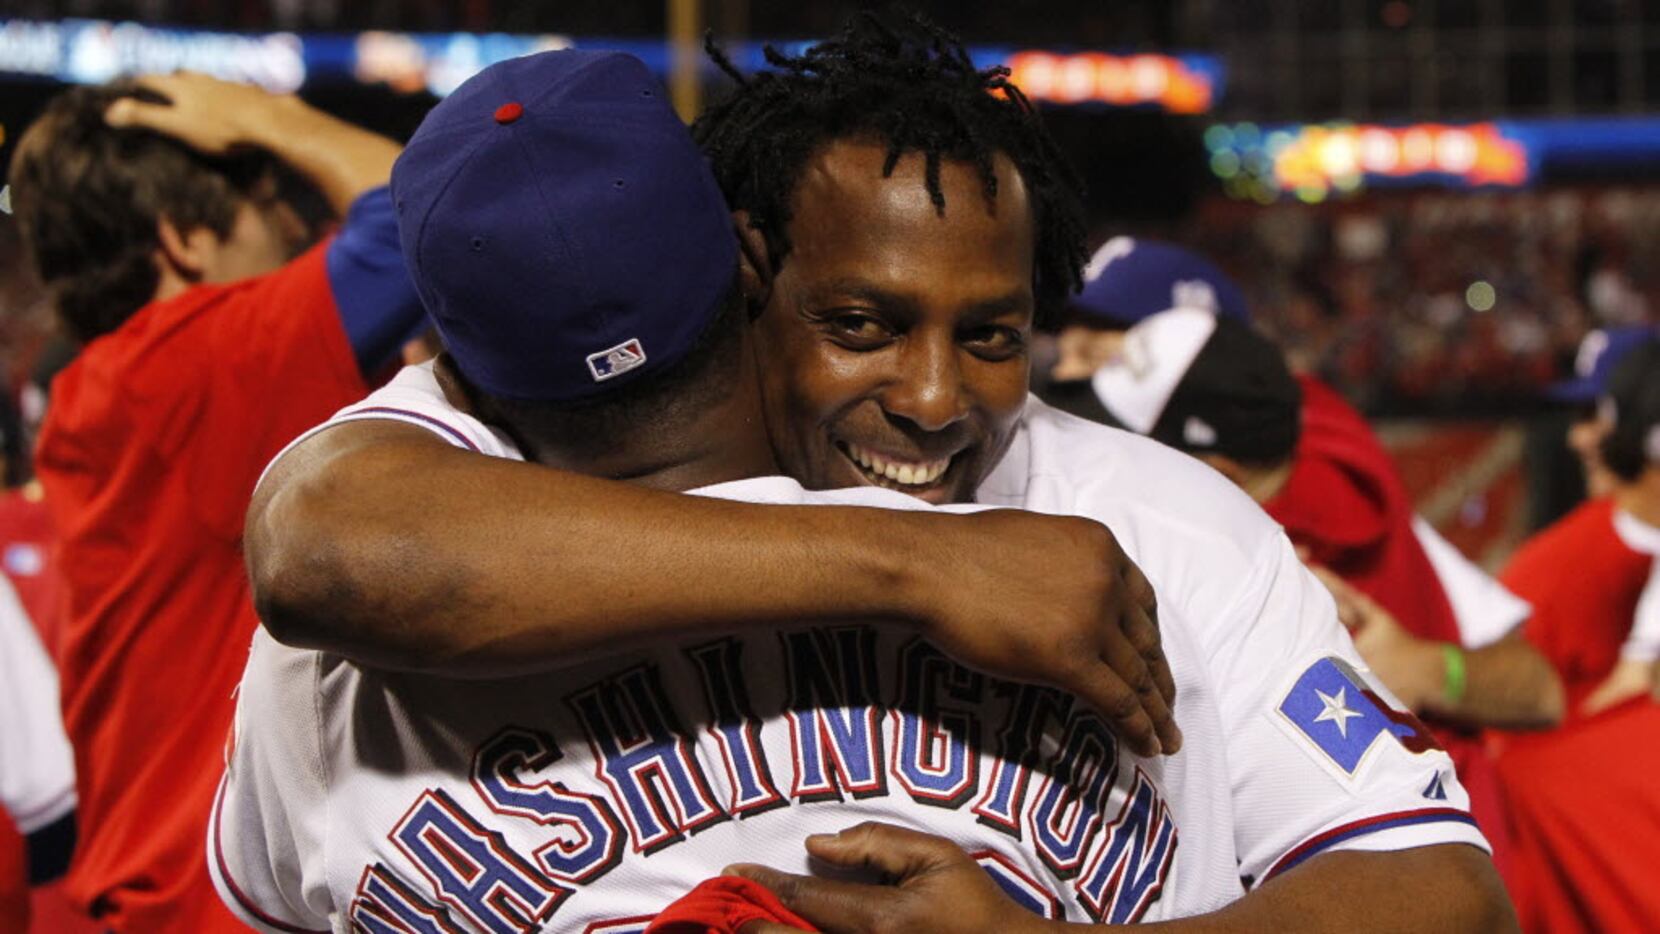 Rangers appear to be leader to sign Vladimir Guerrero's son, Pablo Guerrero